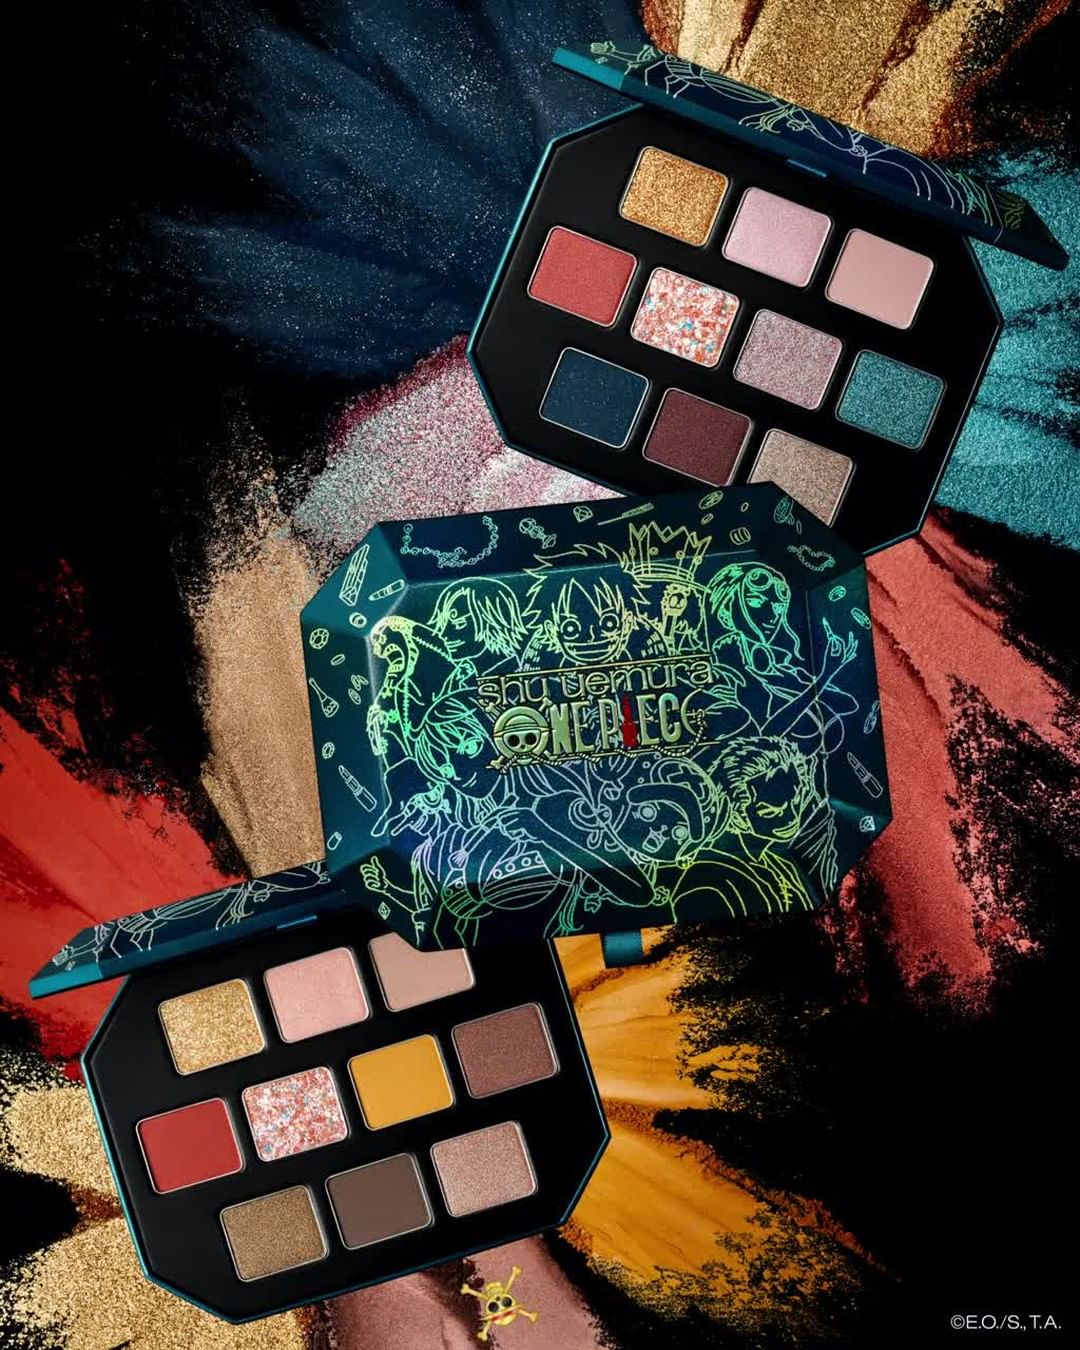 shu uemura - if you look closely at the packaging, you will notice that the ONE PIECE characters are holding shu uemura products! don’t miss out on the limited edition eyeshadow palettes of the shu ue...